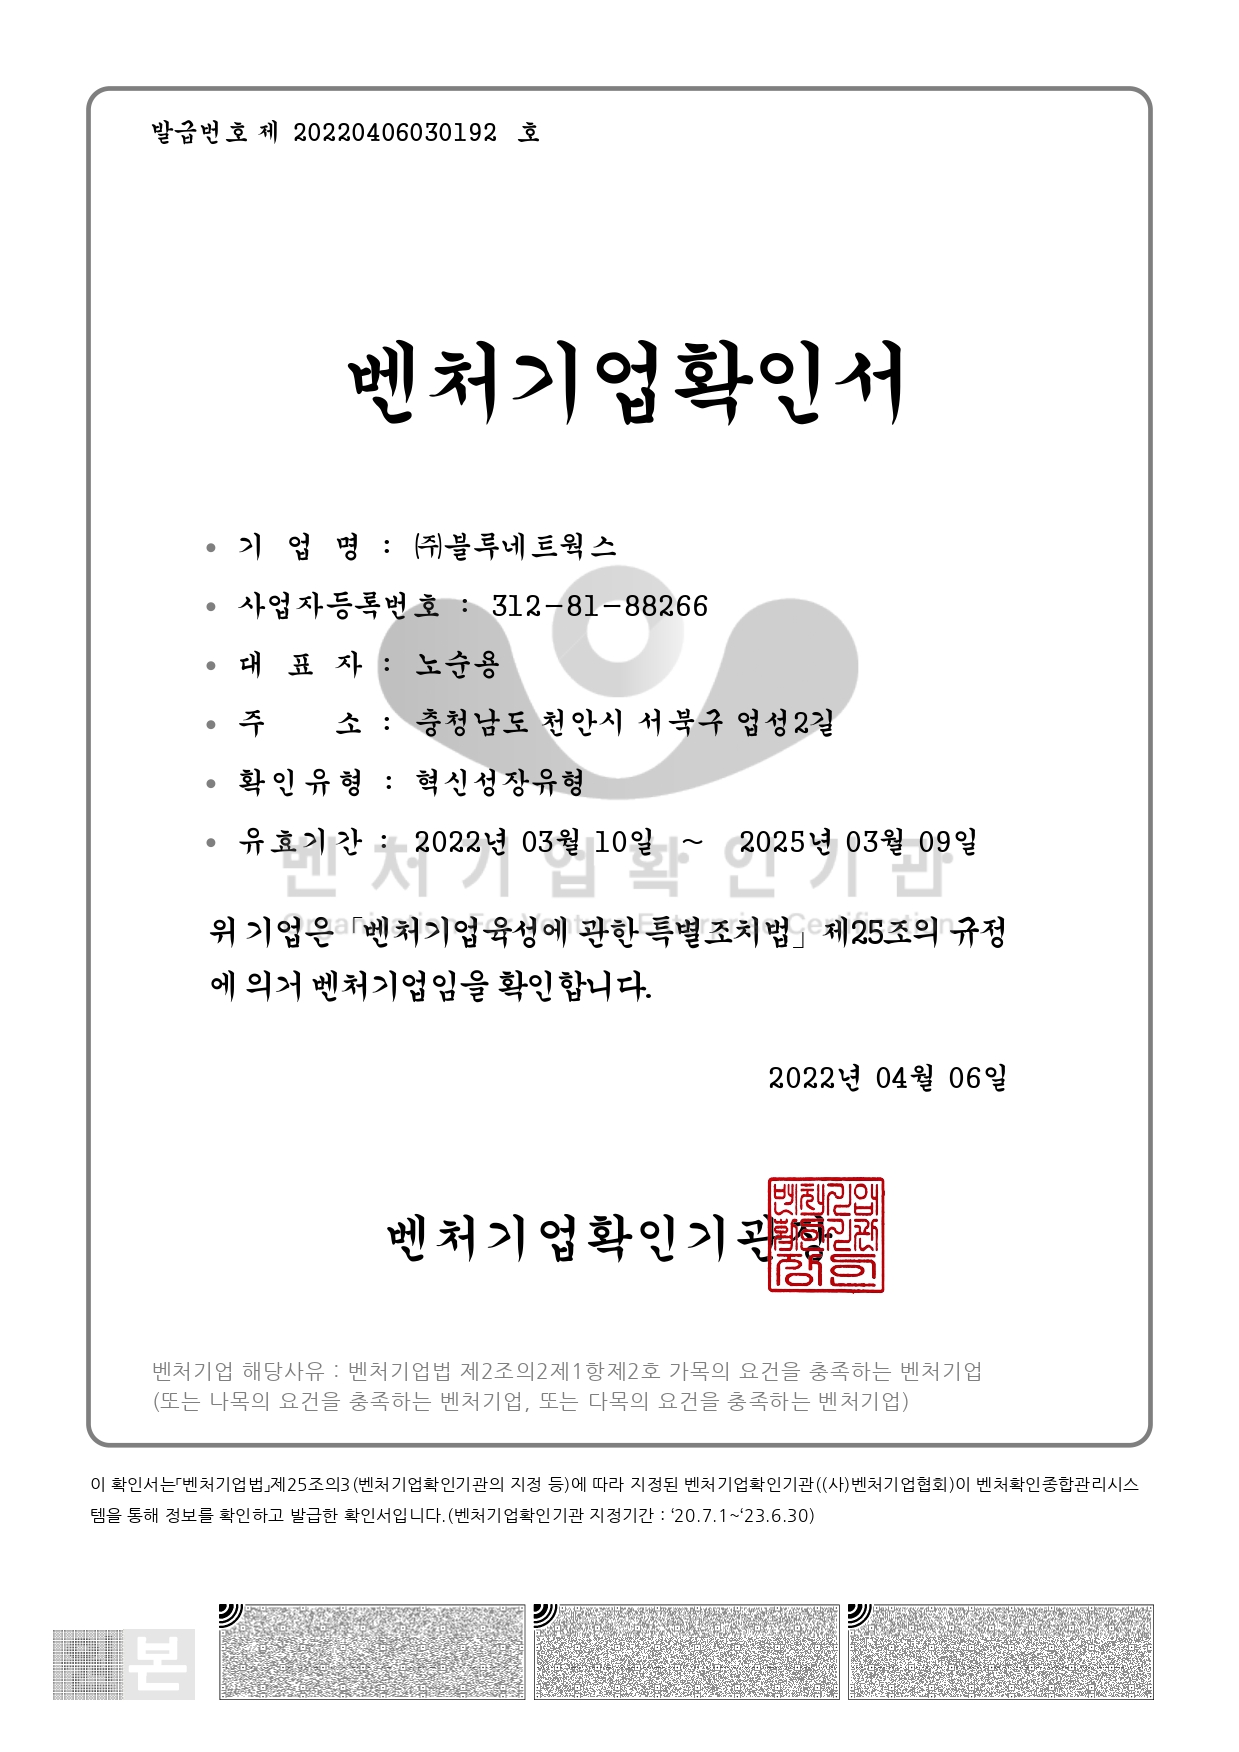 Confirmation letter of venture company (~25.03.09)_Blue Networks (20.03.10) [첨부 이미지1]